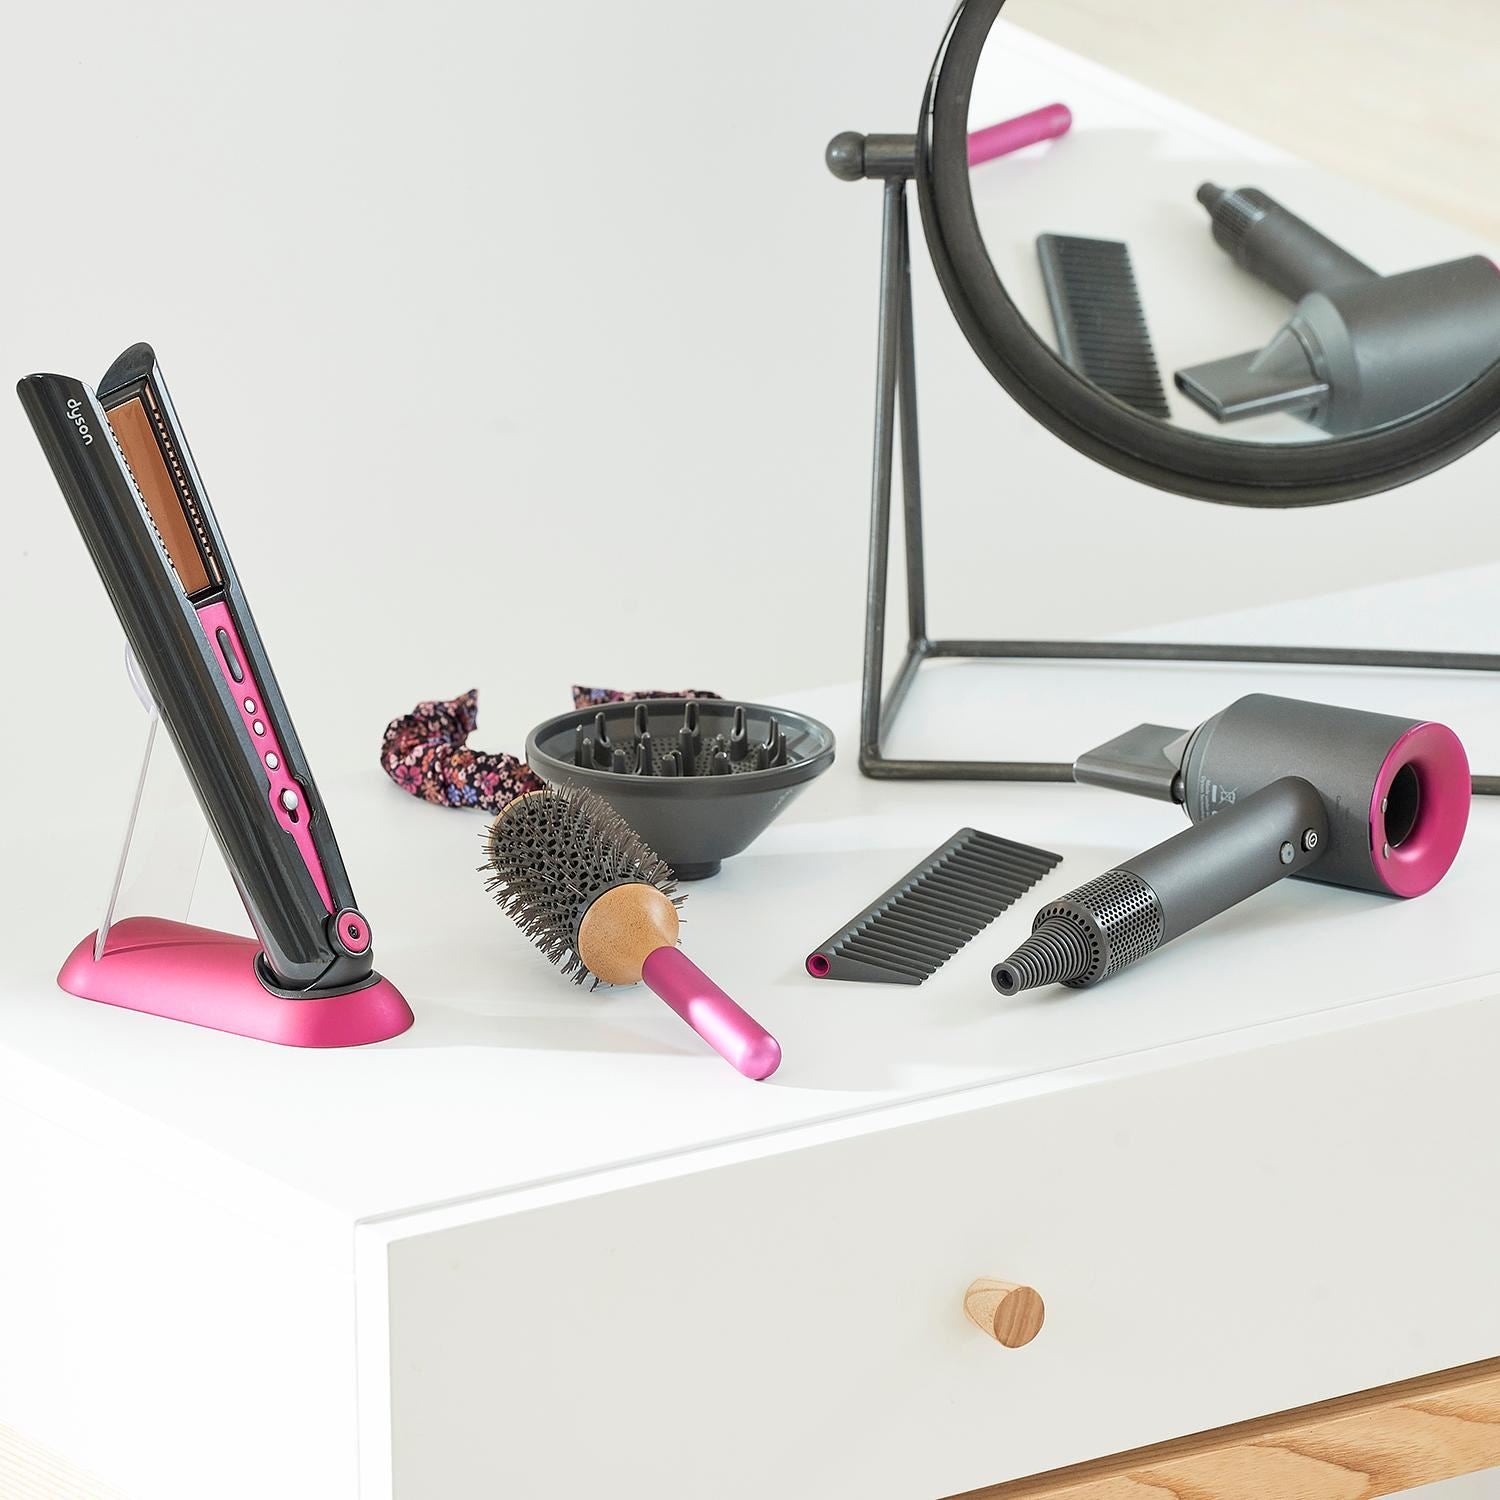 Dyson Deluxe Styling Set